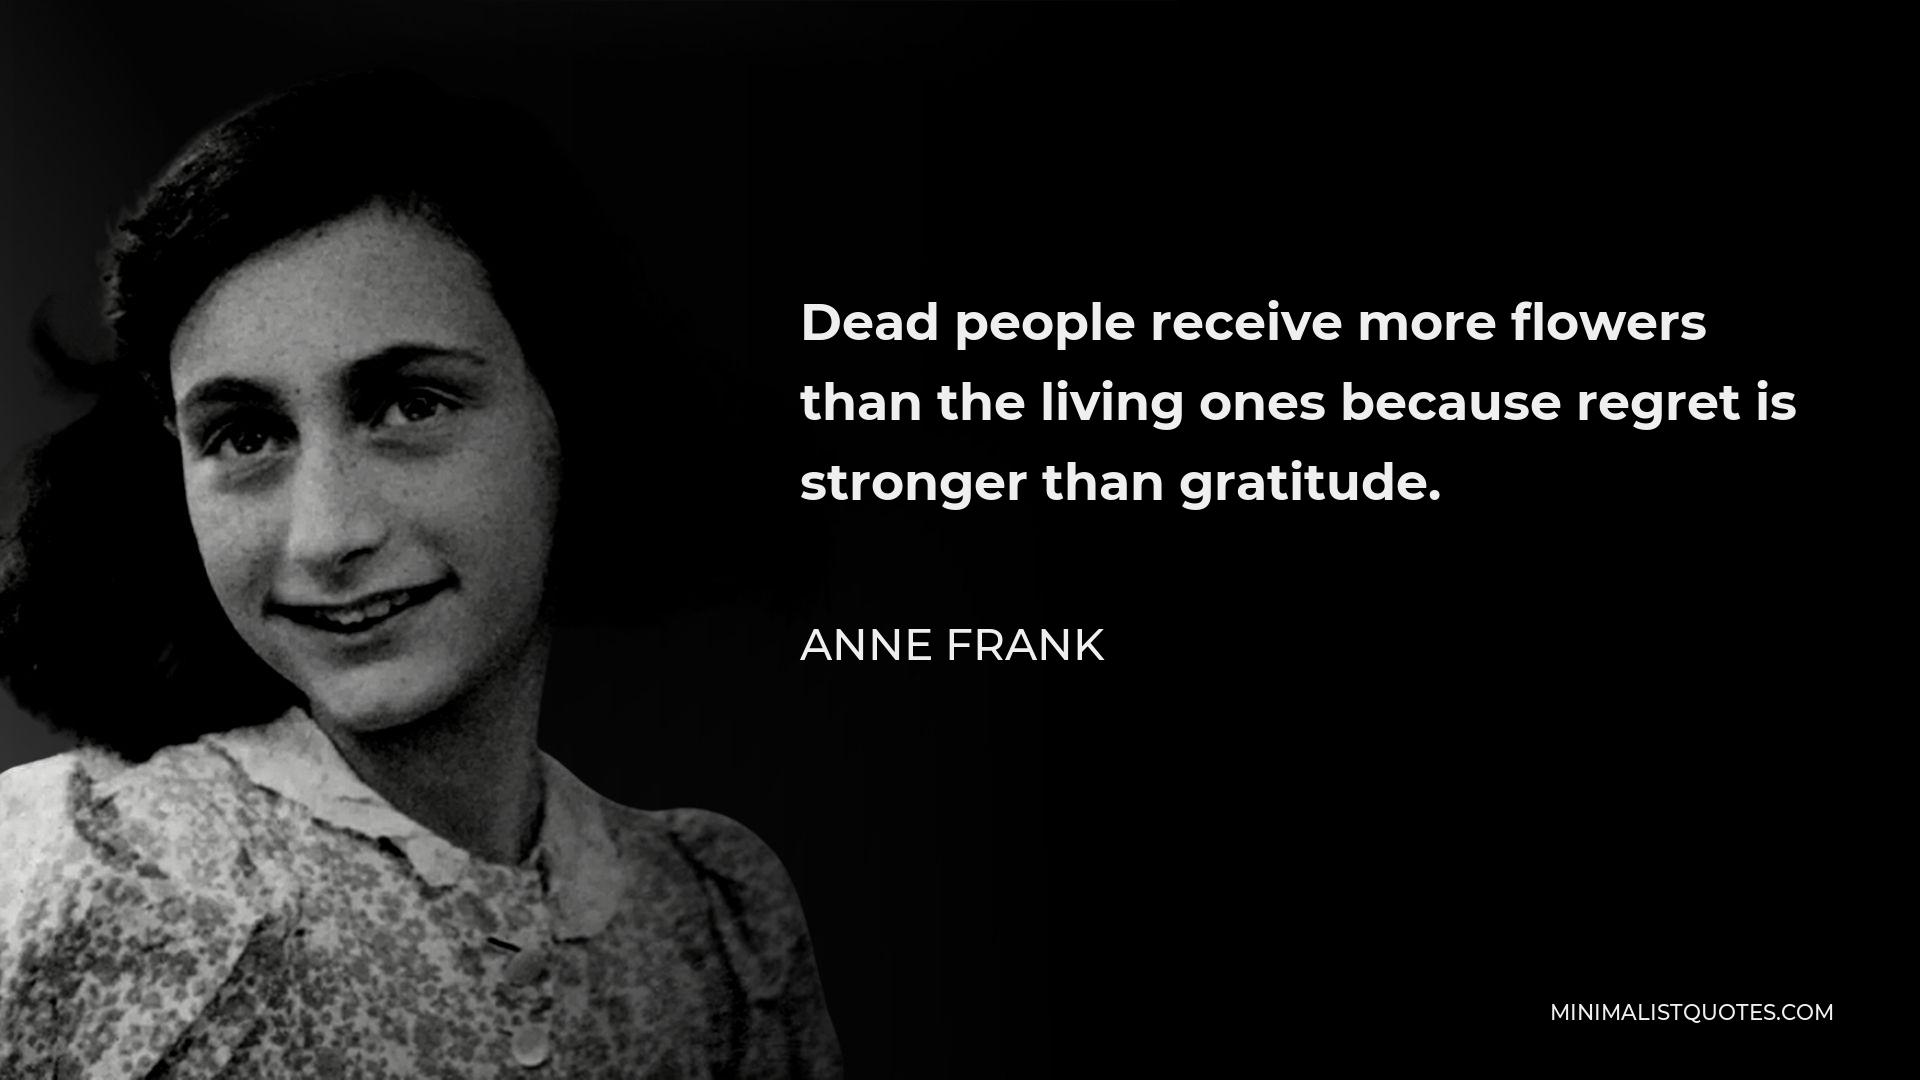 Anne Frank Quote - Dead people receive more flowers than the living ones because regret is stronger than gratitude.